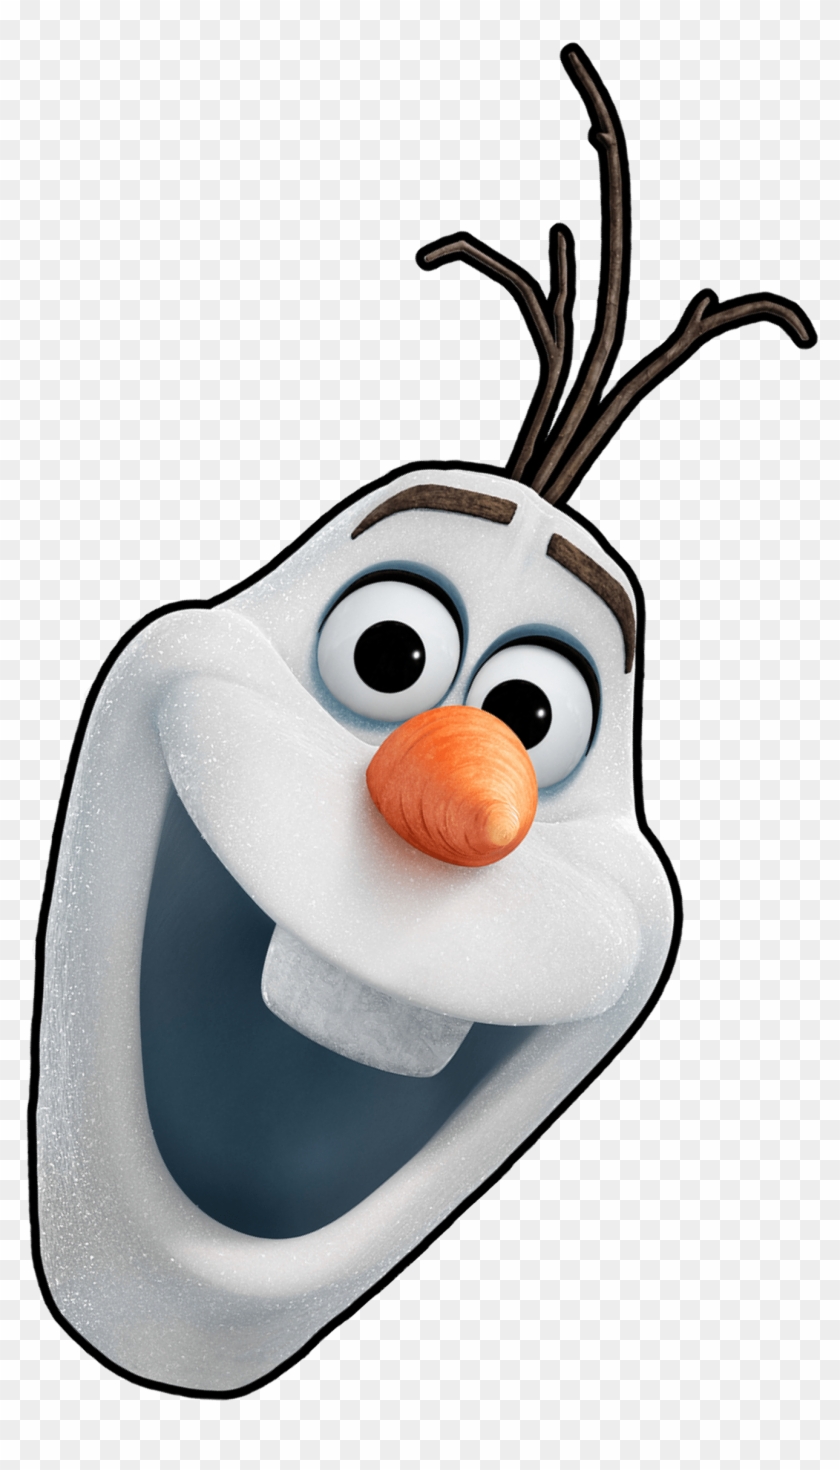 free-olaf-printable-do-you-want-to-build-a-snowman-pin-on-room-125-2022